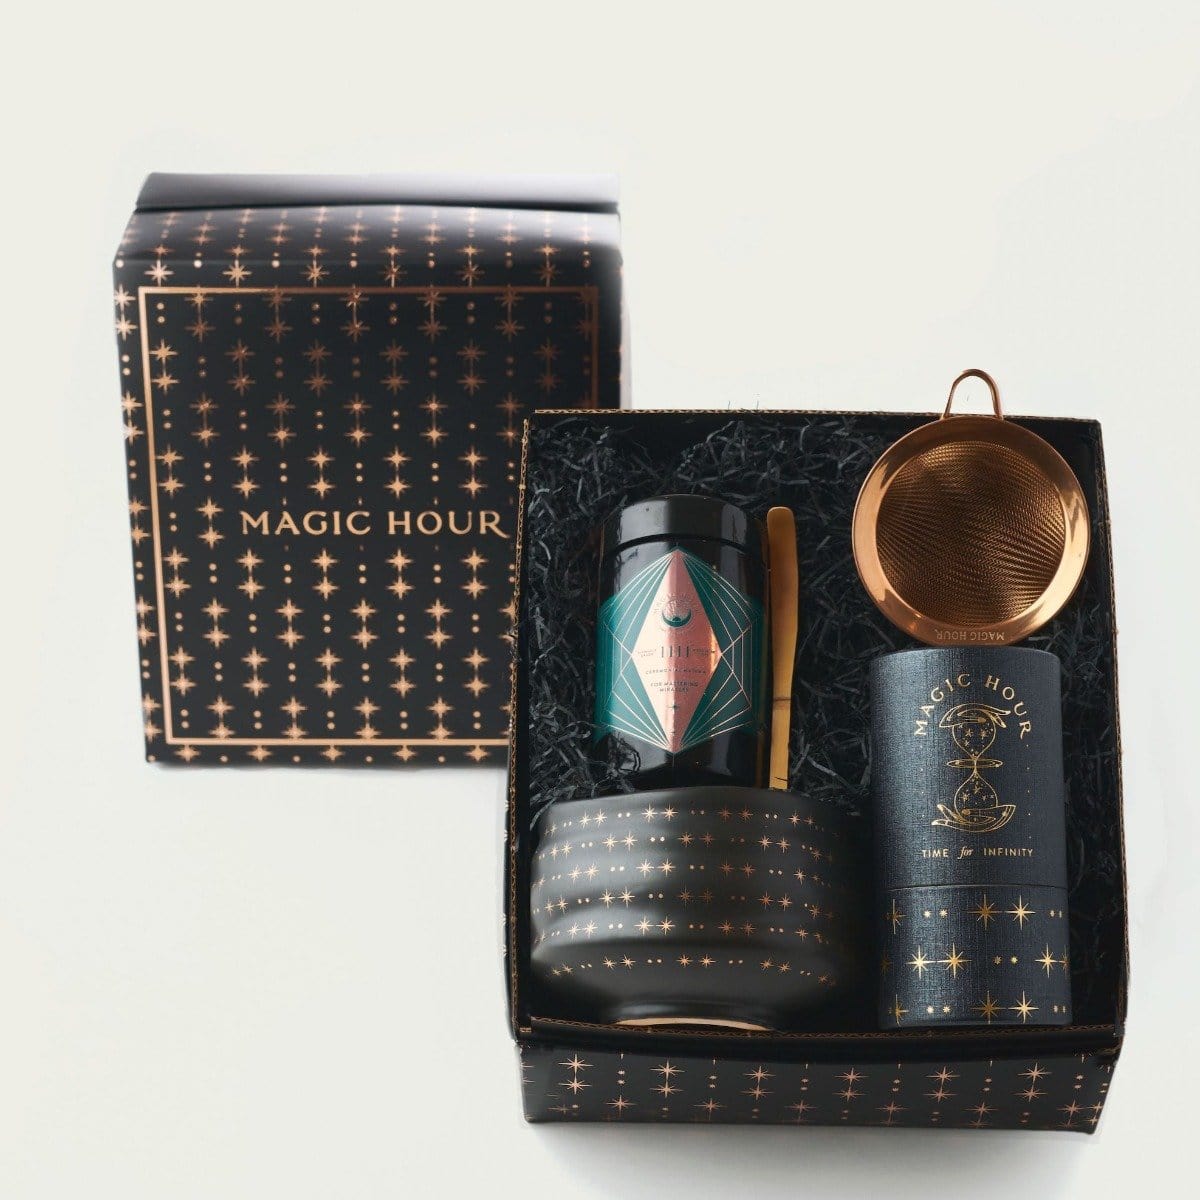 A beautifully packaged tea gift set named "Matcha 1111 : Gift Set" from Magic Hour contains a tin of loose leaf tea, a tea strainer, and a jar with a spoon, all nestled in a black box with gold star patterns. The box lid sits next to the set, flaunting the same design and "MAGIC HOUR TEA" text.